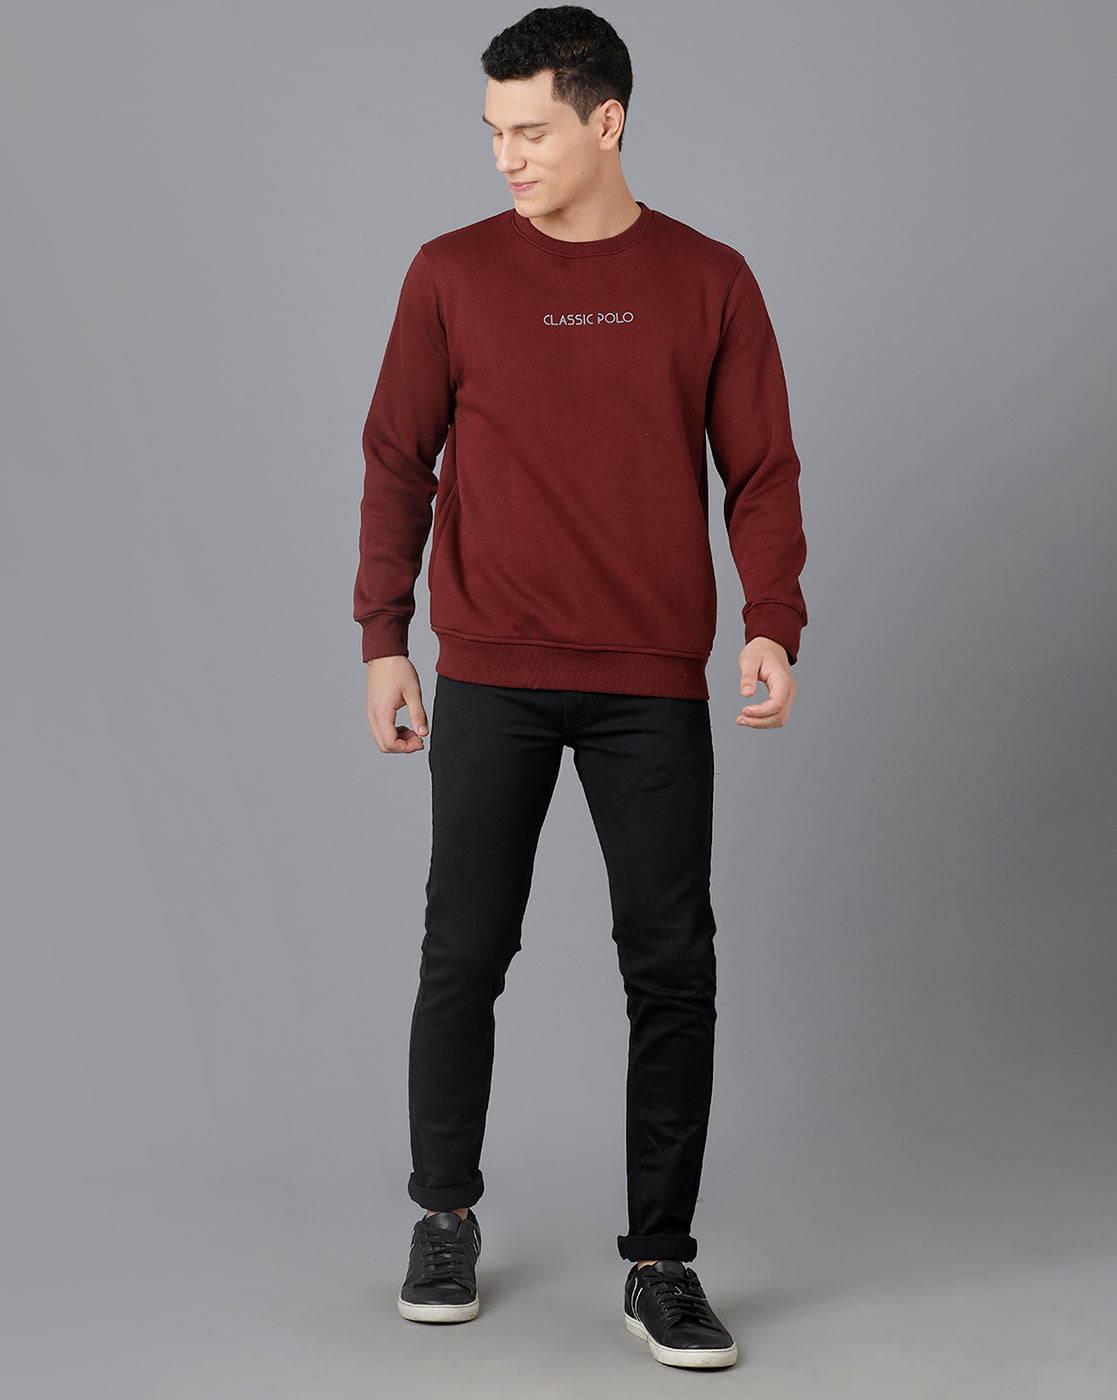 Classic Polo Mens Cotton Blend Full Sleeve Solid Slim Fit Maroon Color Round Neck Sweat Shirt | Cpss - 414 I